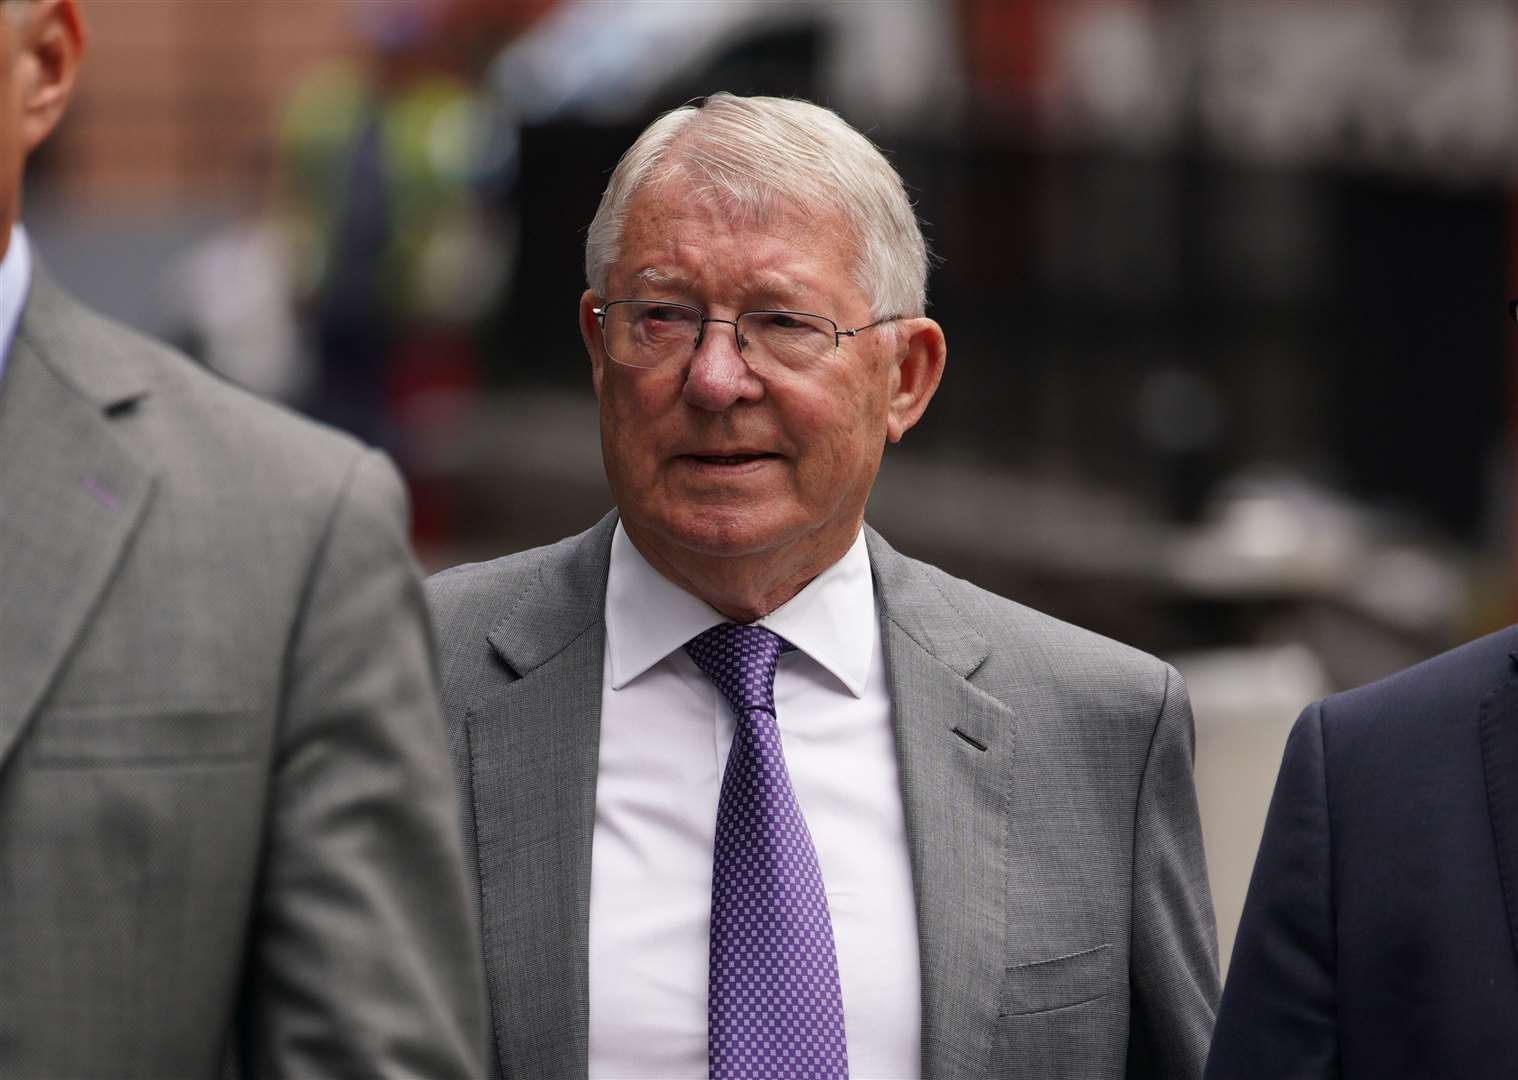 Former Manchester United manager Sir Alex Ferguson appeared at the trial as a character witness for Ryan Giggs (Peter Byrne/PA)